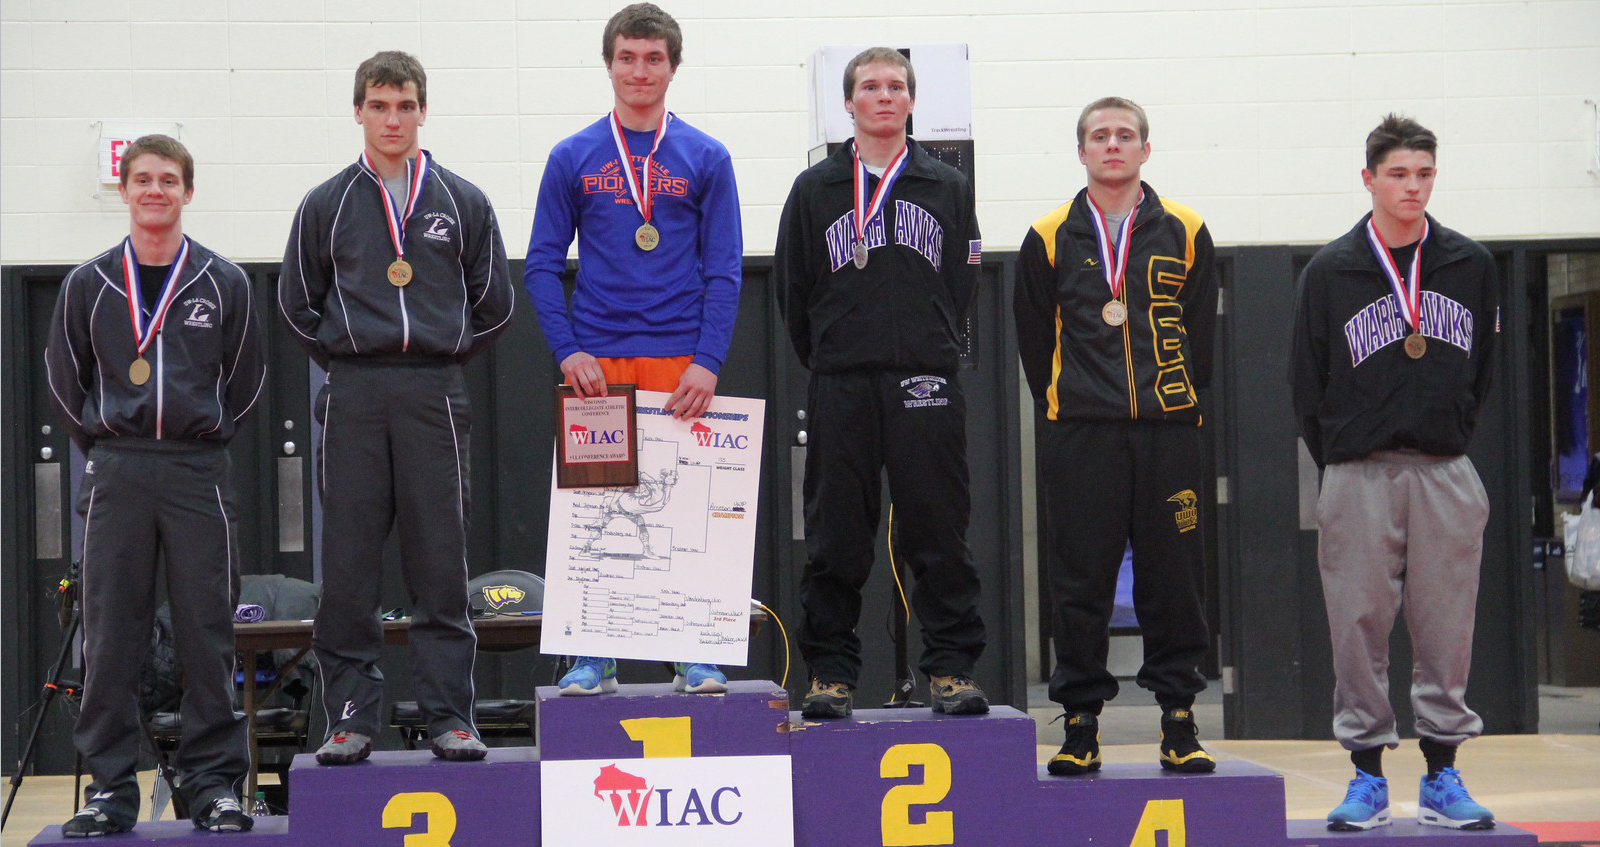 Dellas Vandenberg finished fourth in the 133-pound weight class at the WIAC Championship.